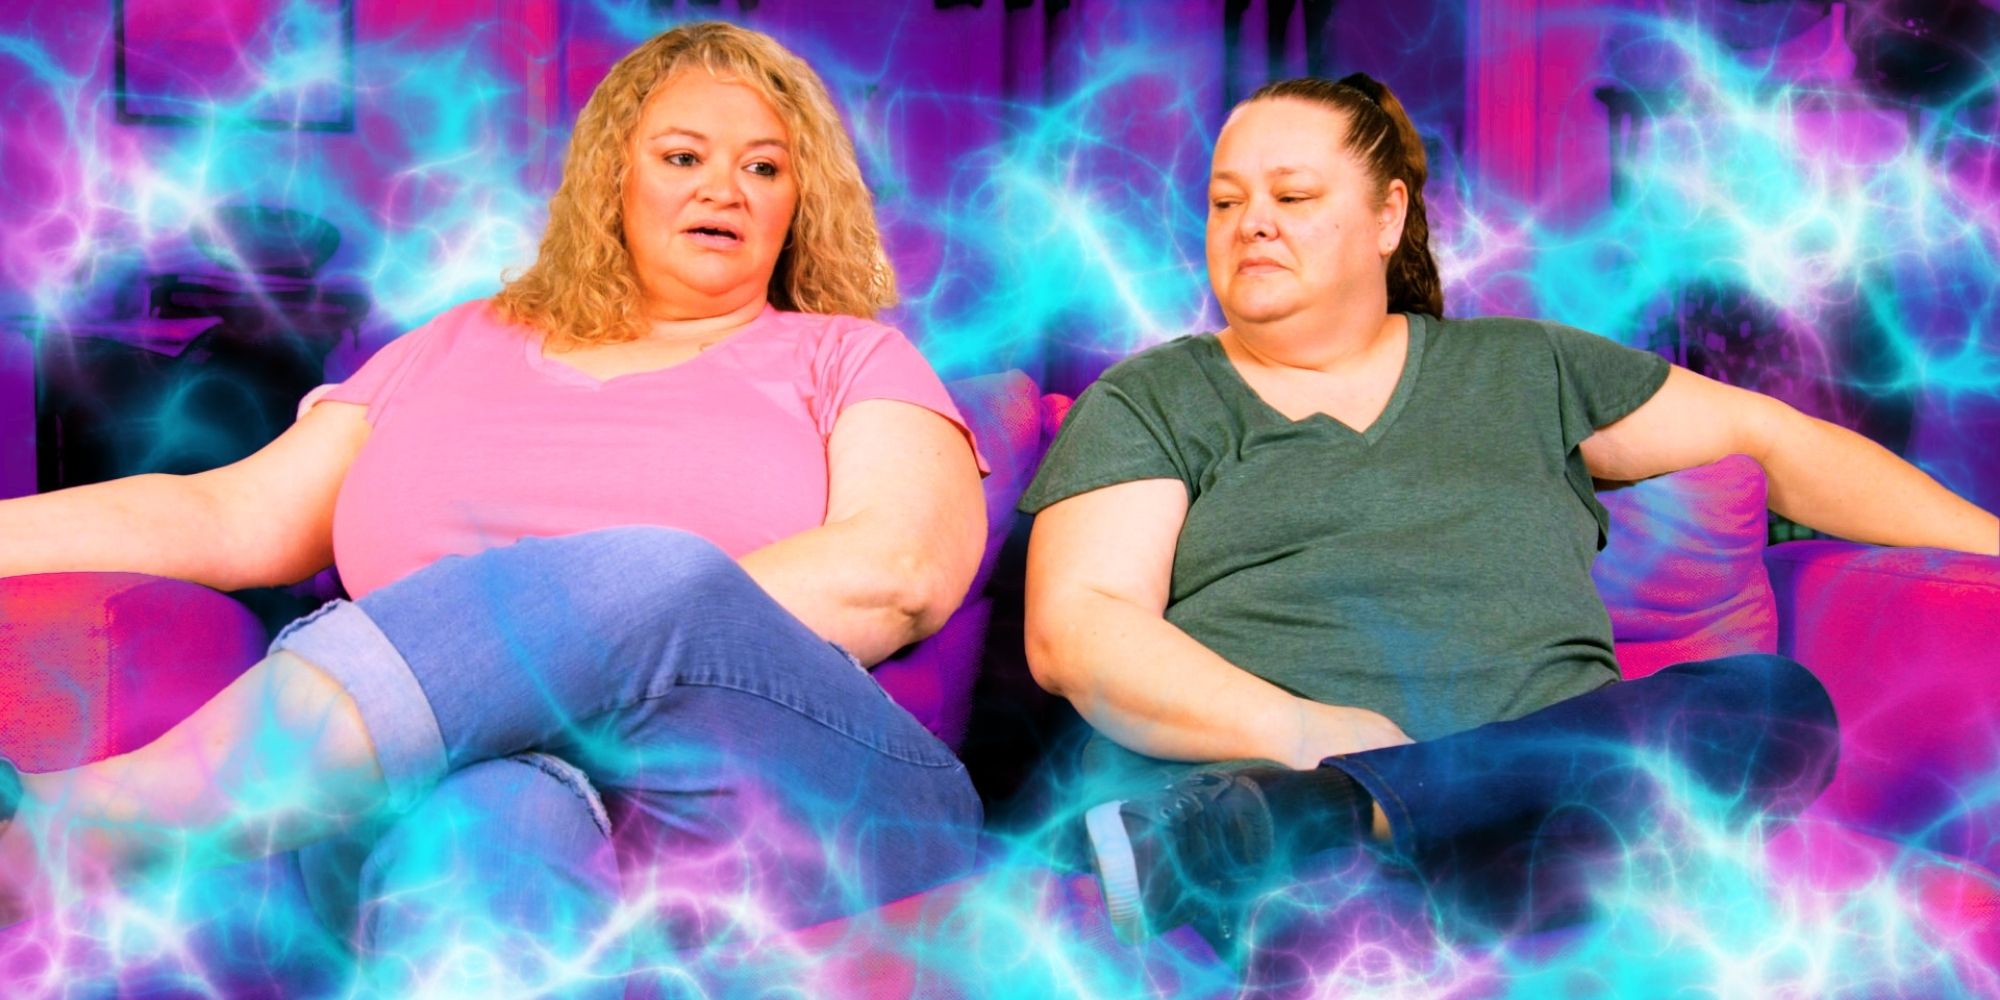 1000-lb Sisters_ Amanda Halterman & Misty Slaton Wentworth seated side by side, looking contemplative, surrounded by lights and smoke